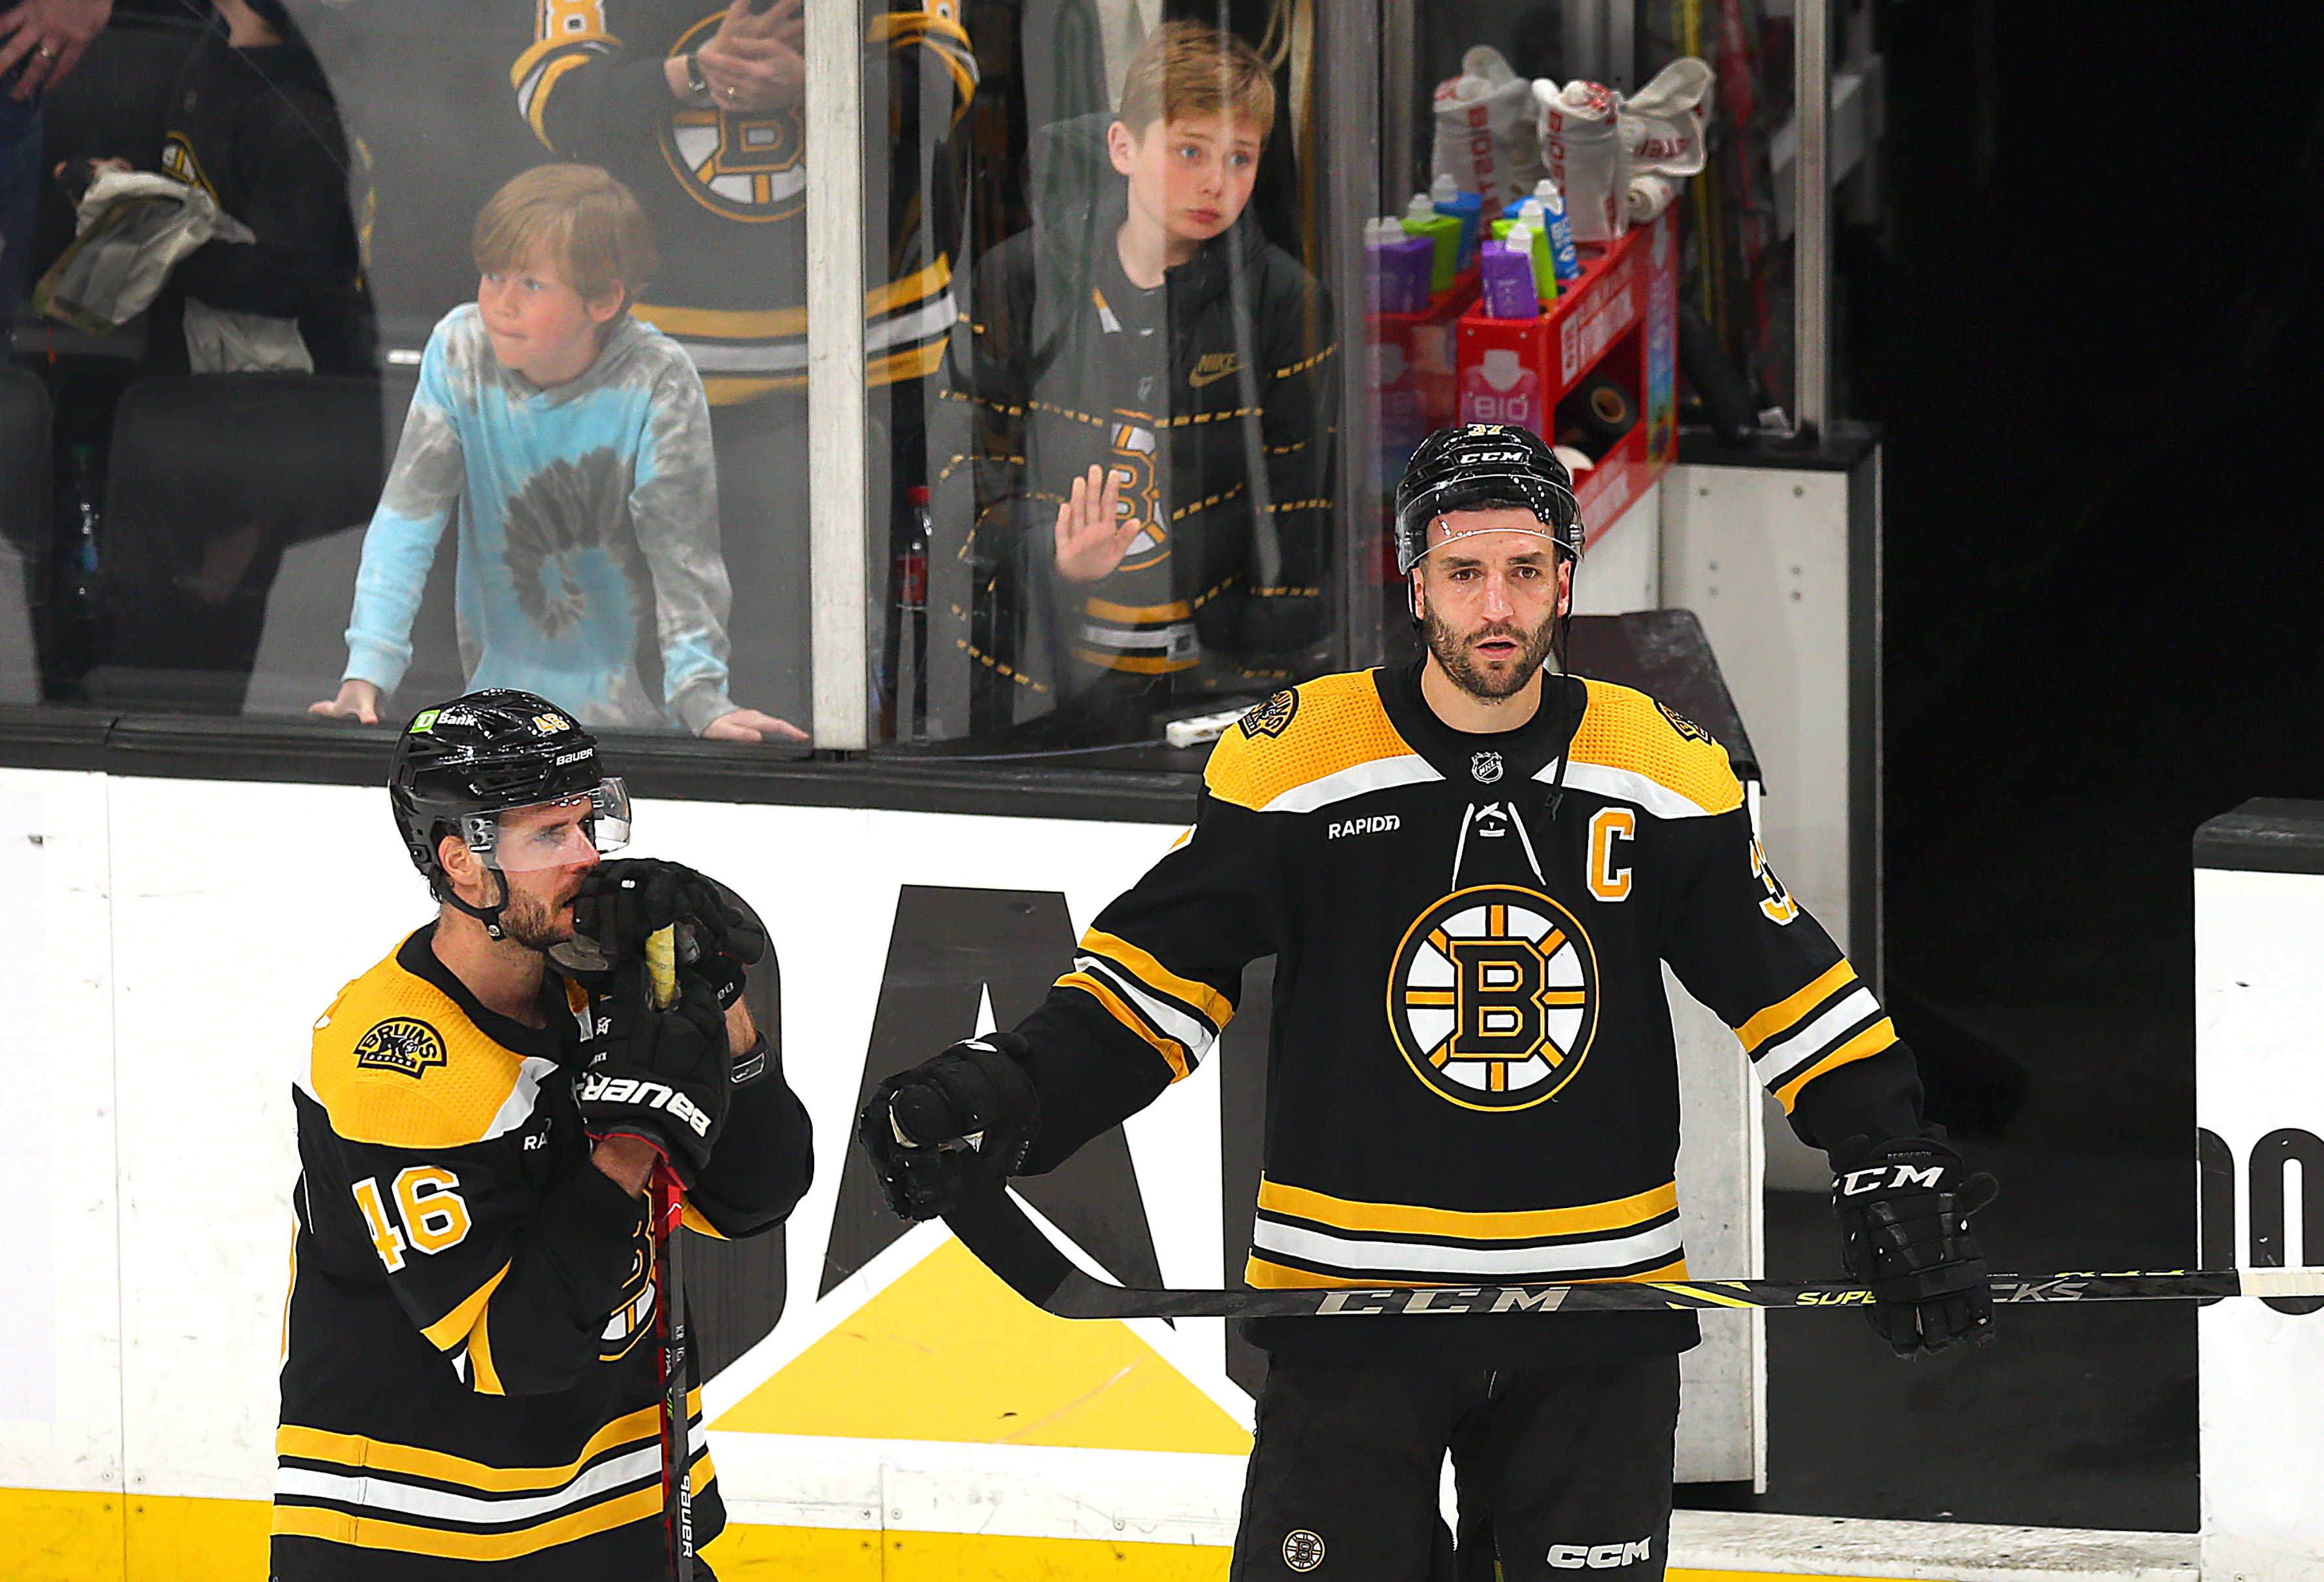 David Krejci returned to Bruins to make another Cup push with Bergeron,  Pastrnak - CBS Boston